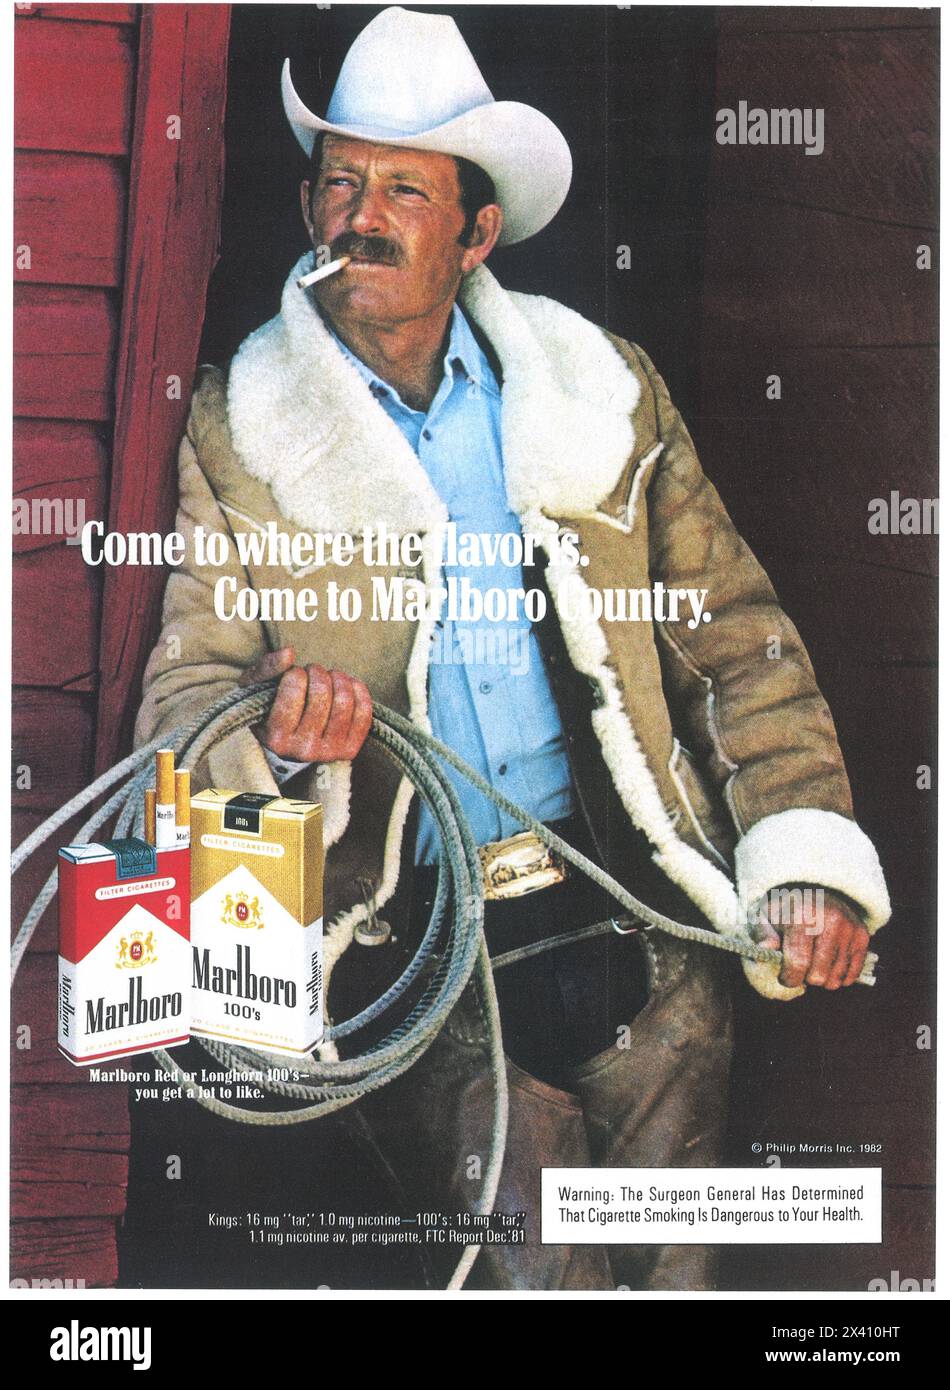 1983 Marlboro cigarettes ad with Darrell Winfield - 'Come to here where the flavor is. Come to Marlboro country.' Stock Photo